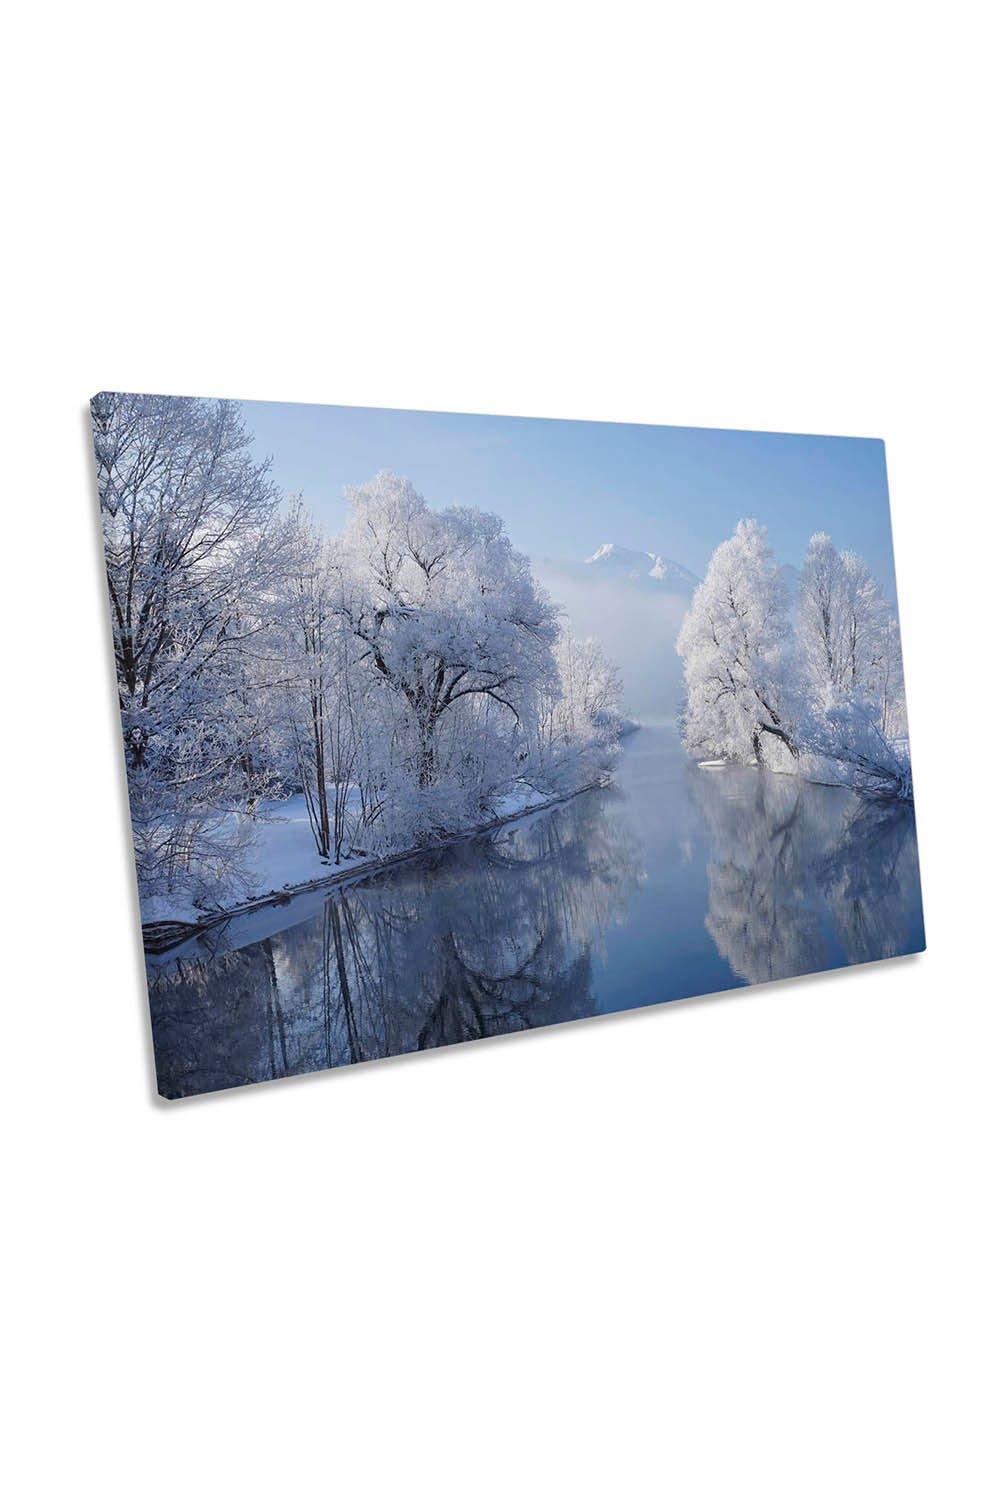 Cold Morning Snow River Landscape Canvas Wall Art Picture Print